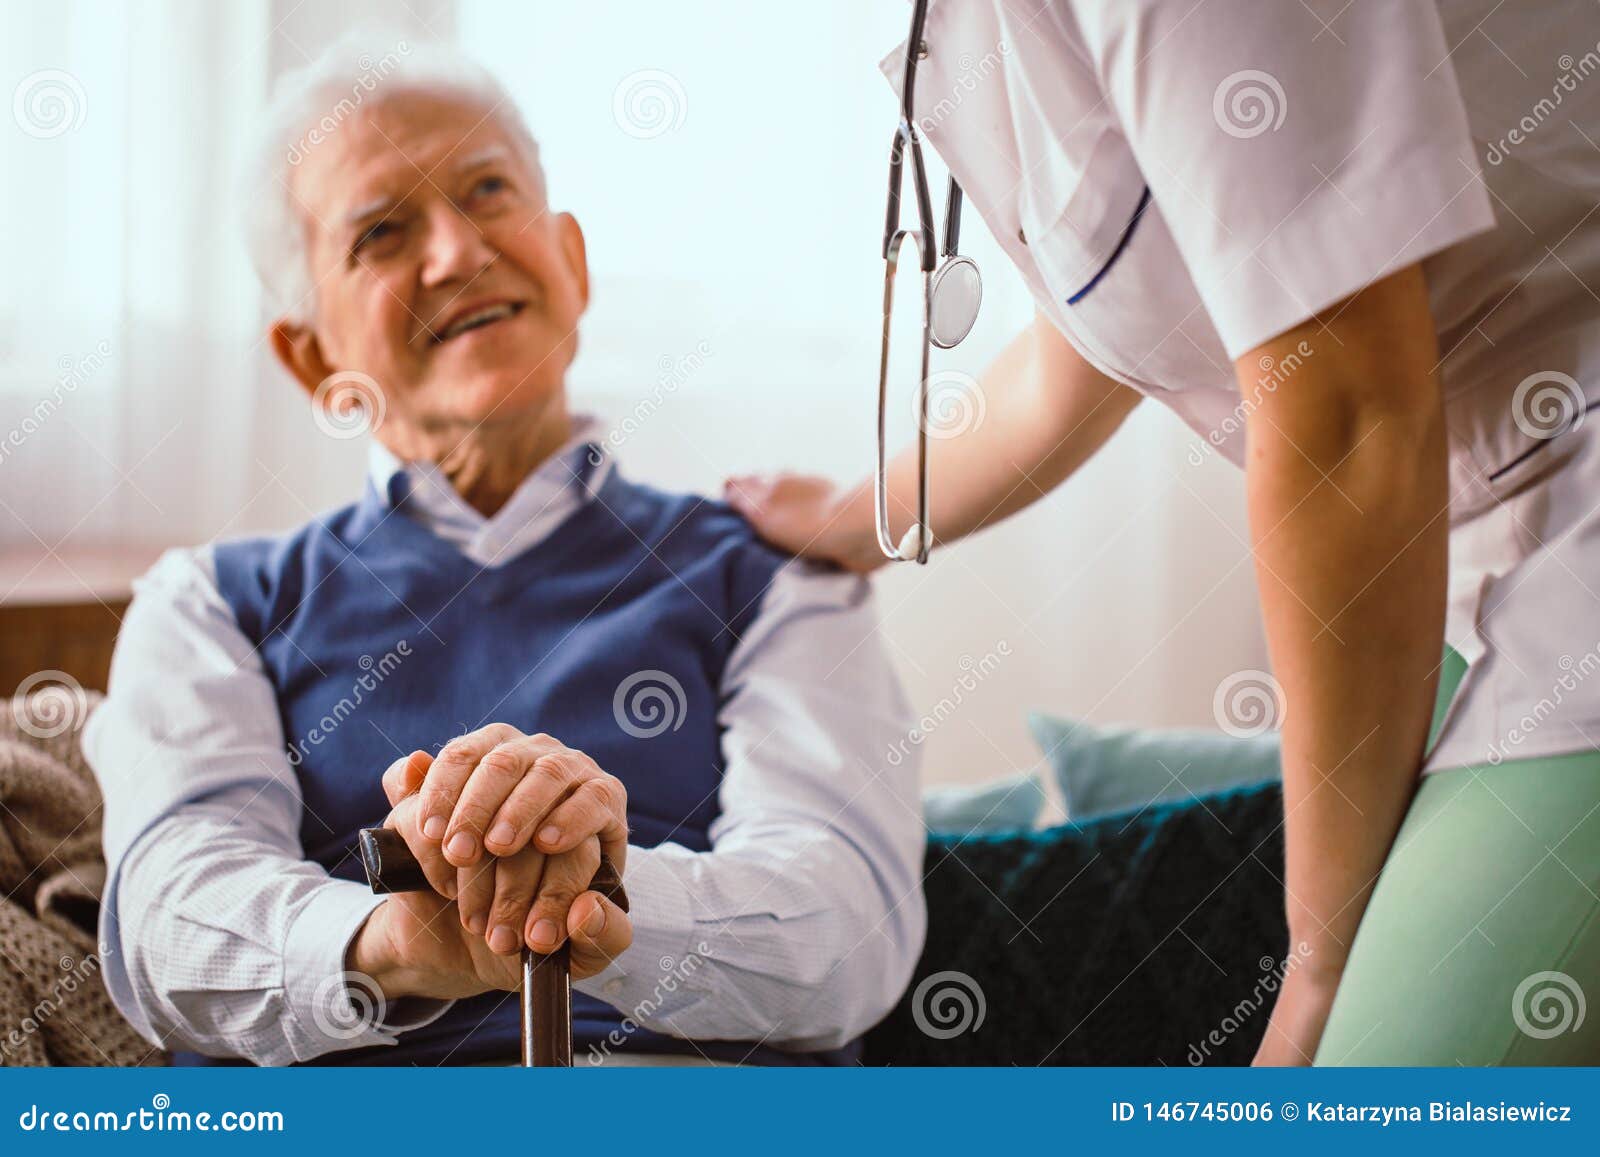 elderly man with stick being comforted by doctor in nursing home